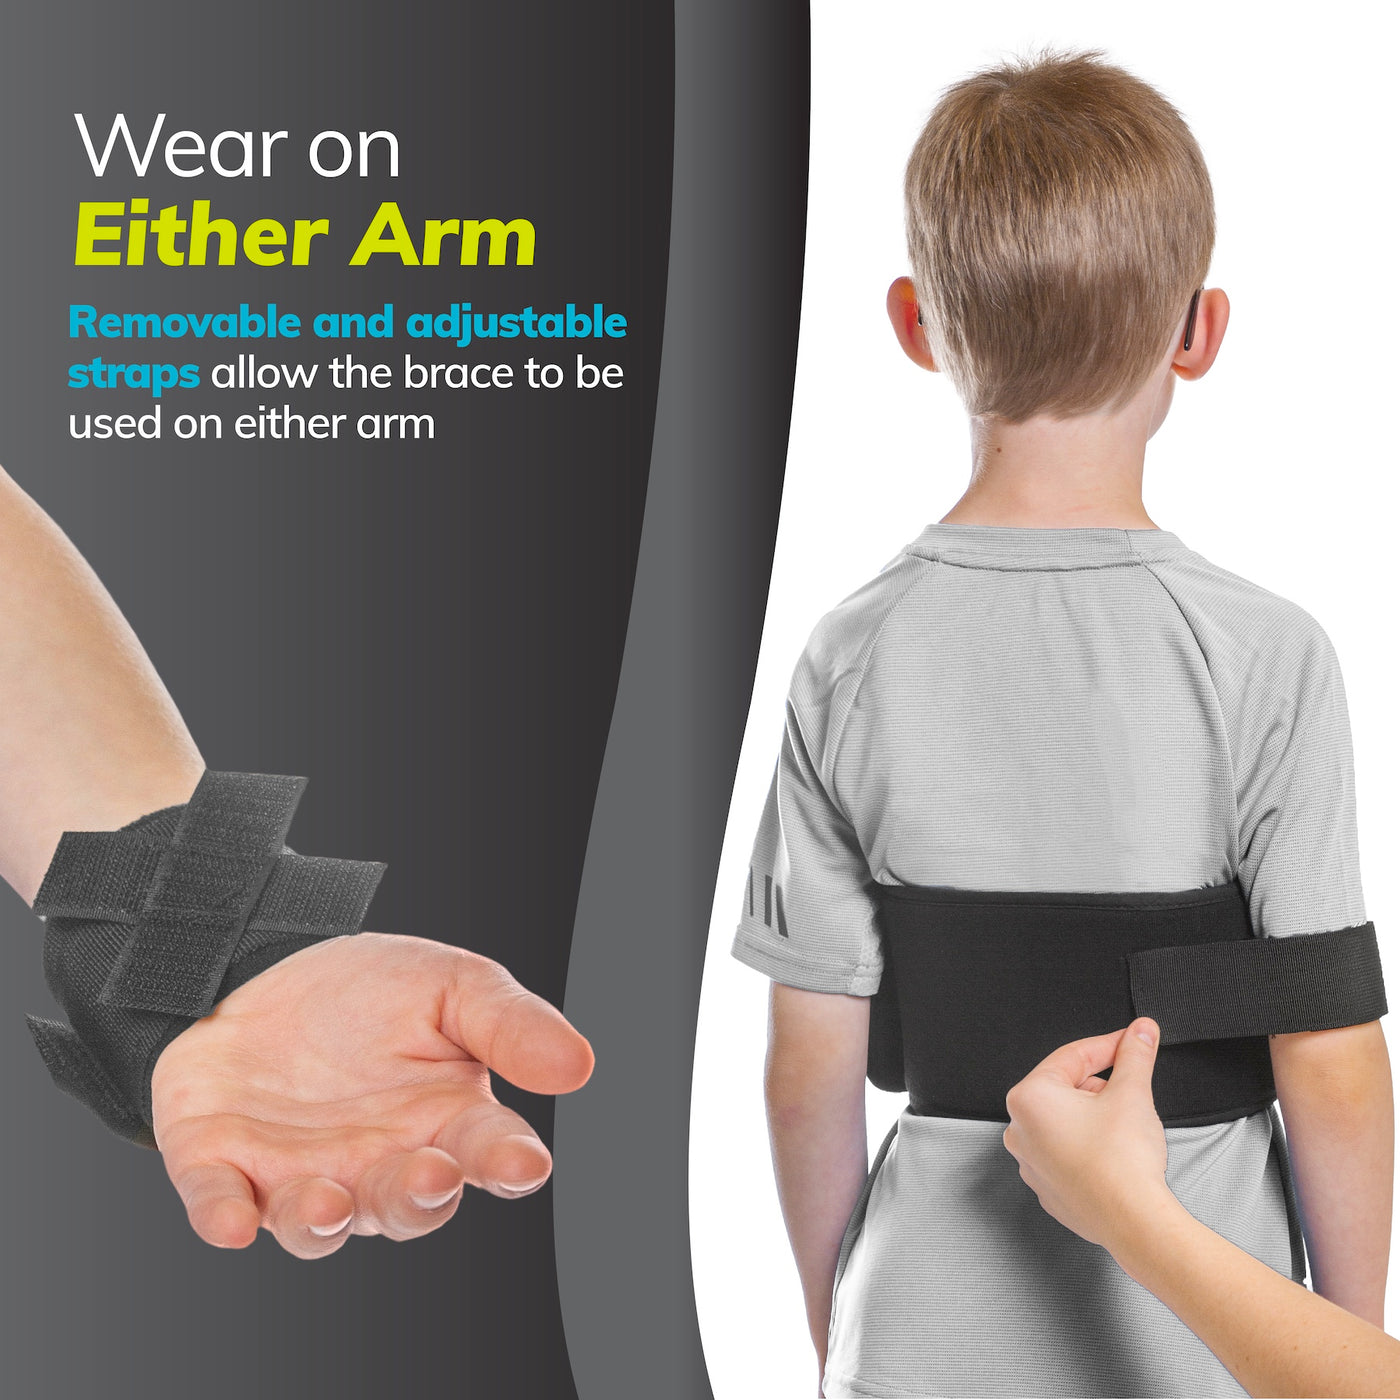 Your child can wear our shoulder immobilizer on either arm thanks to removable and adjustable straps